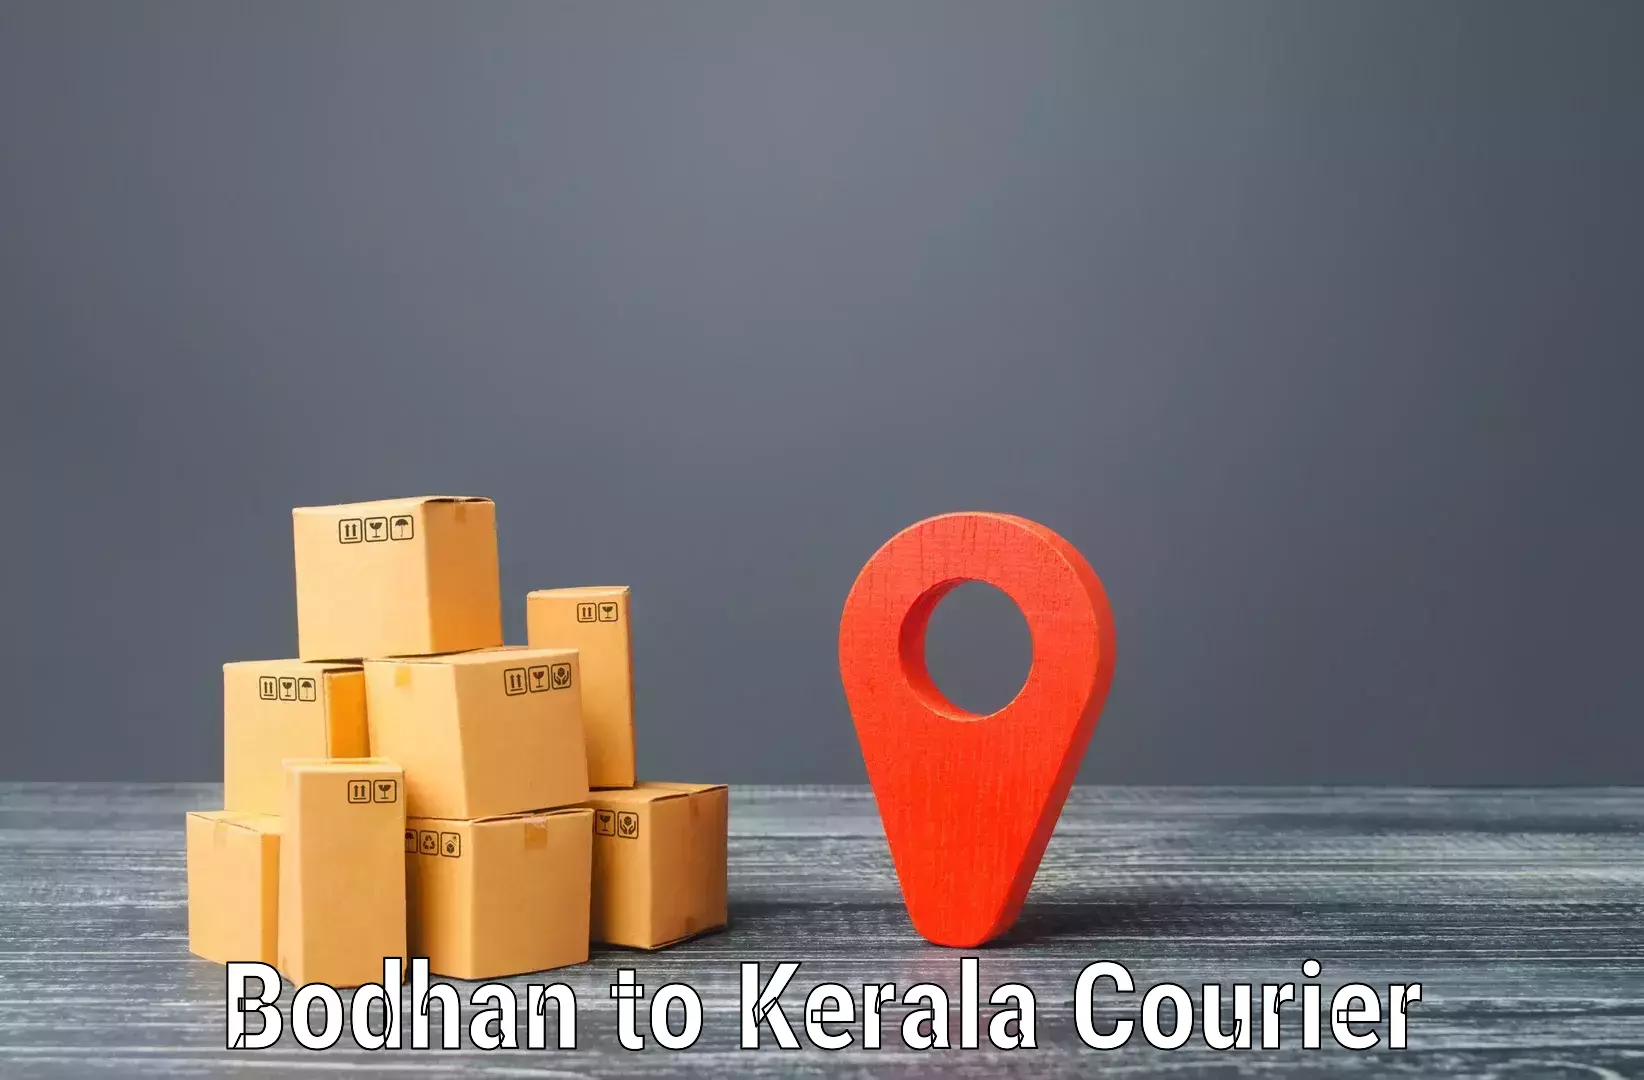 Courier service comparison Bodhan to Manthuka